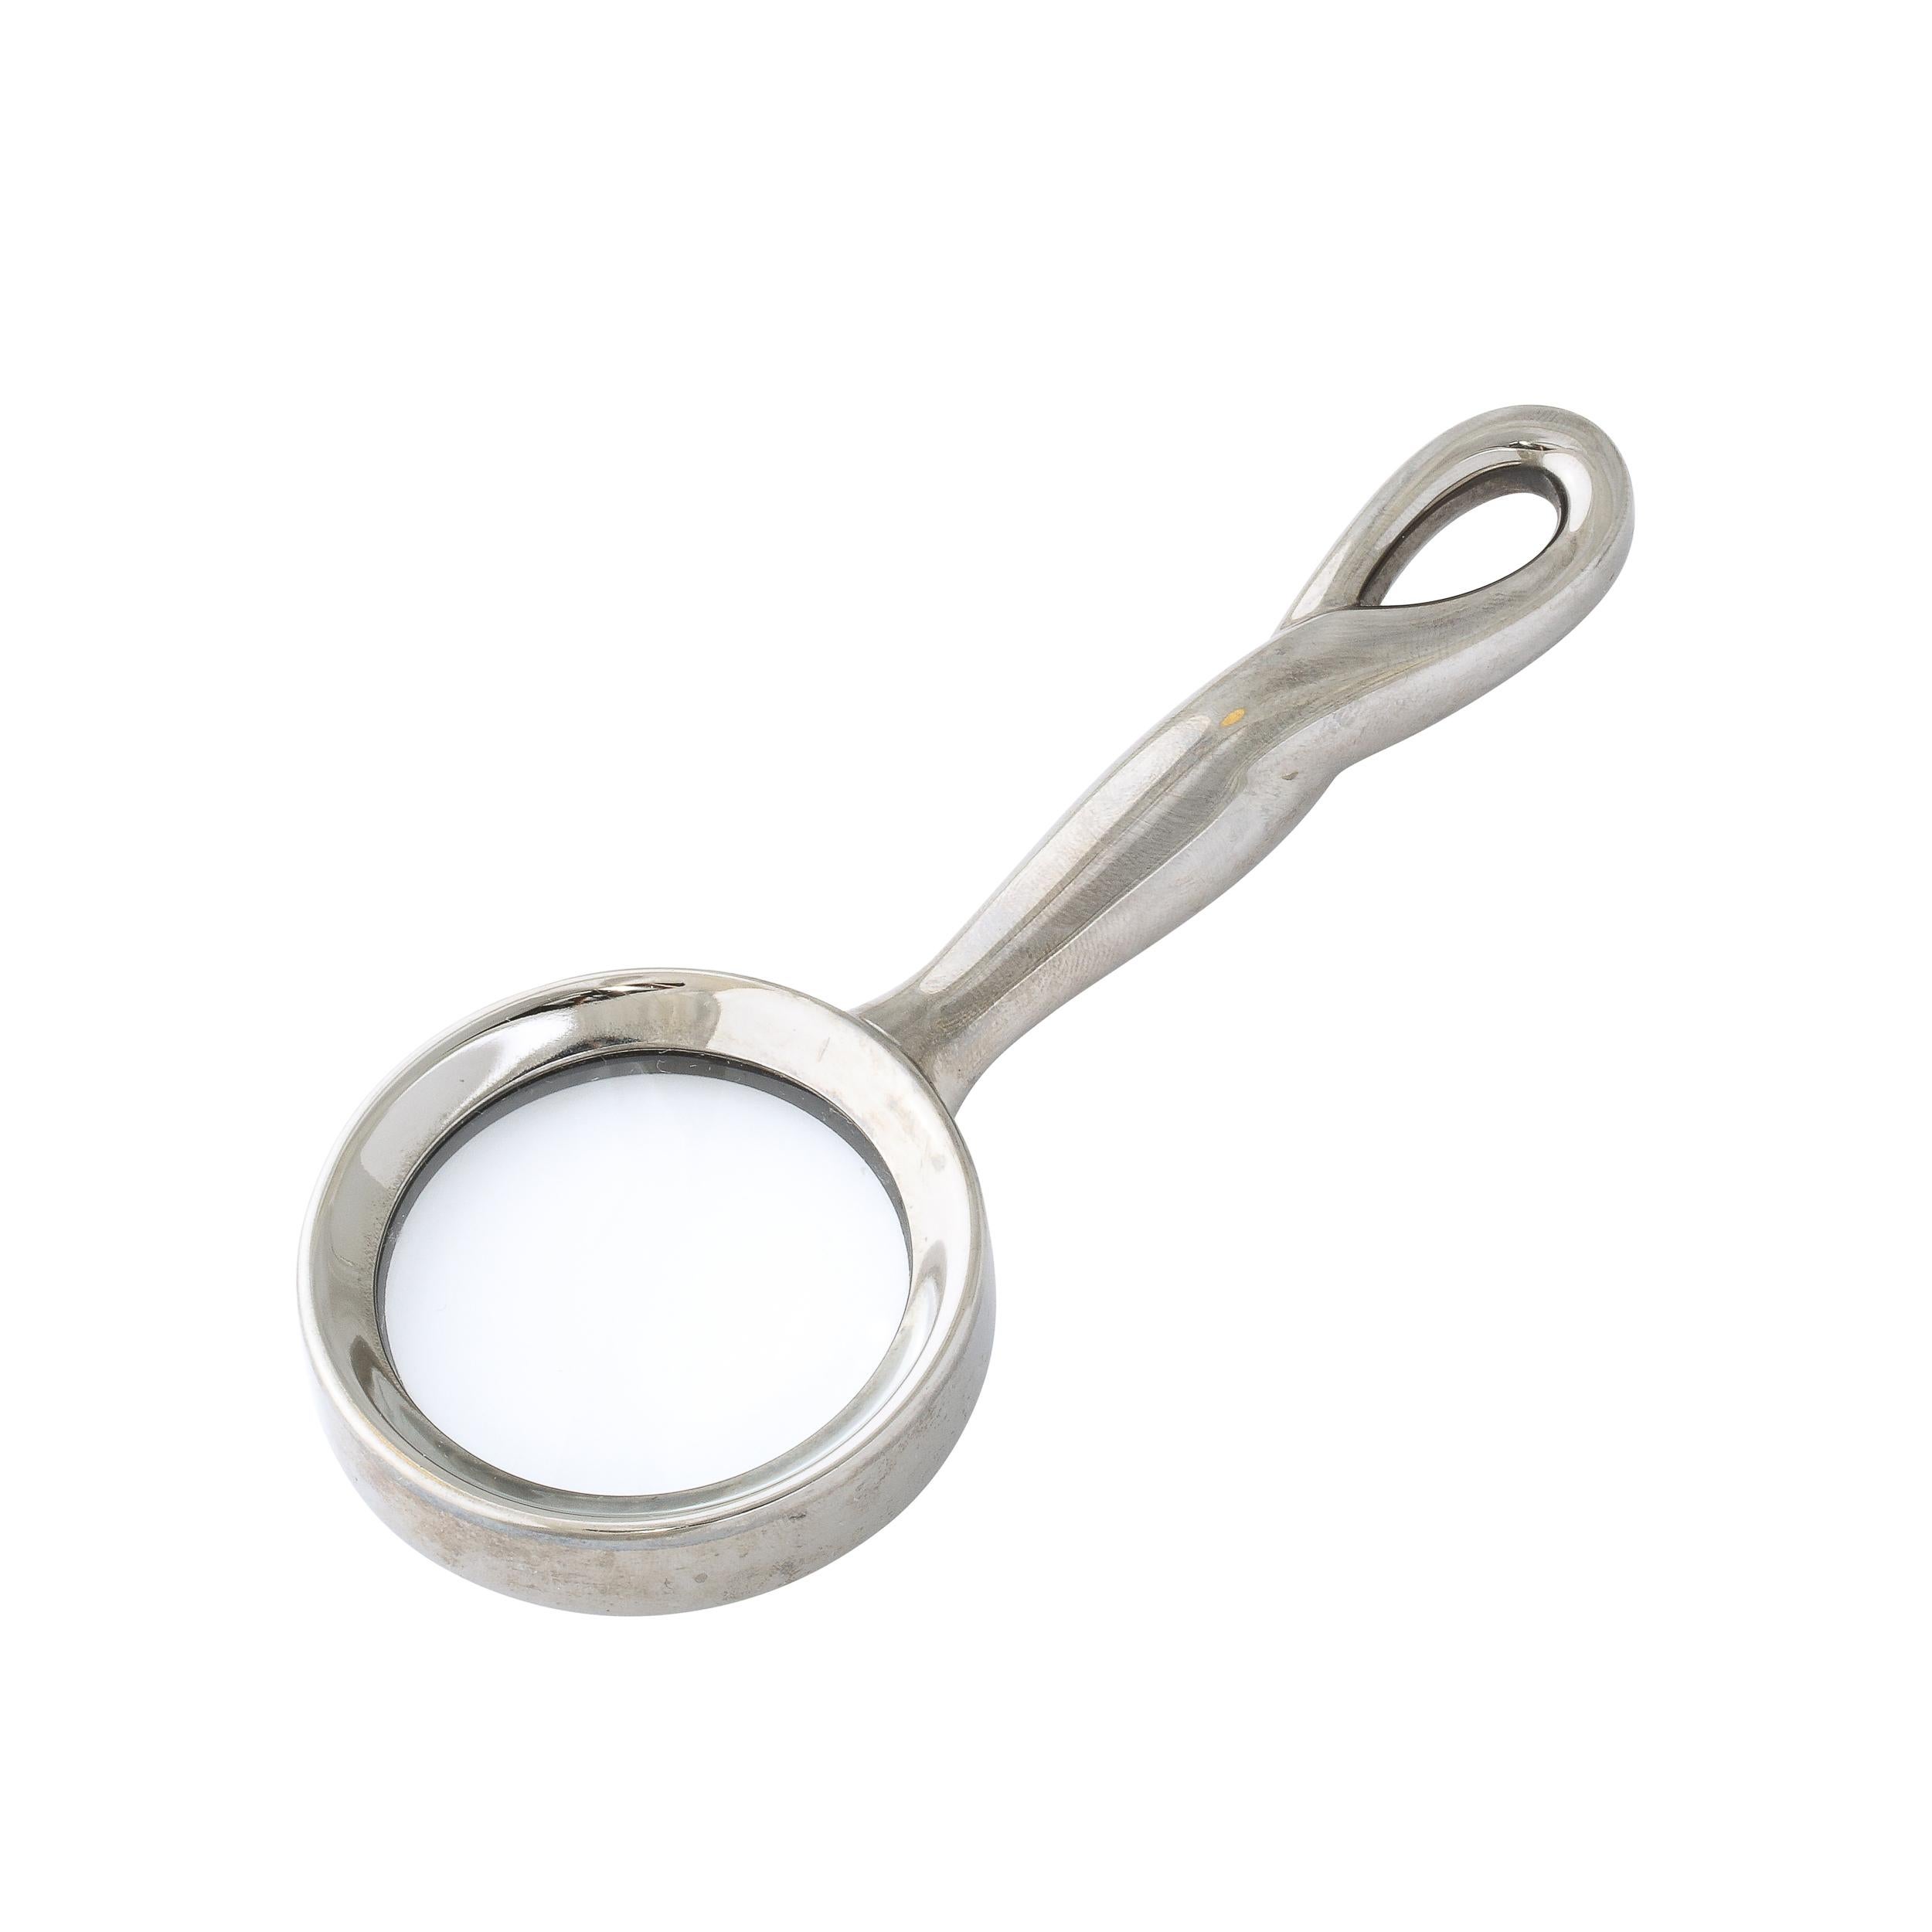 Modernist Magnifying Glass in Gunmetal by Elsa Perretti for Tiffany and Co